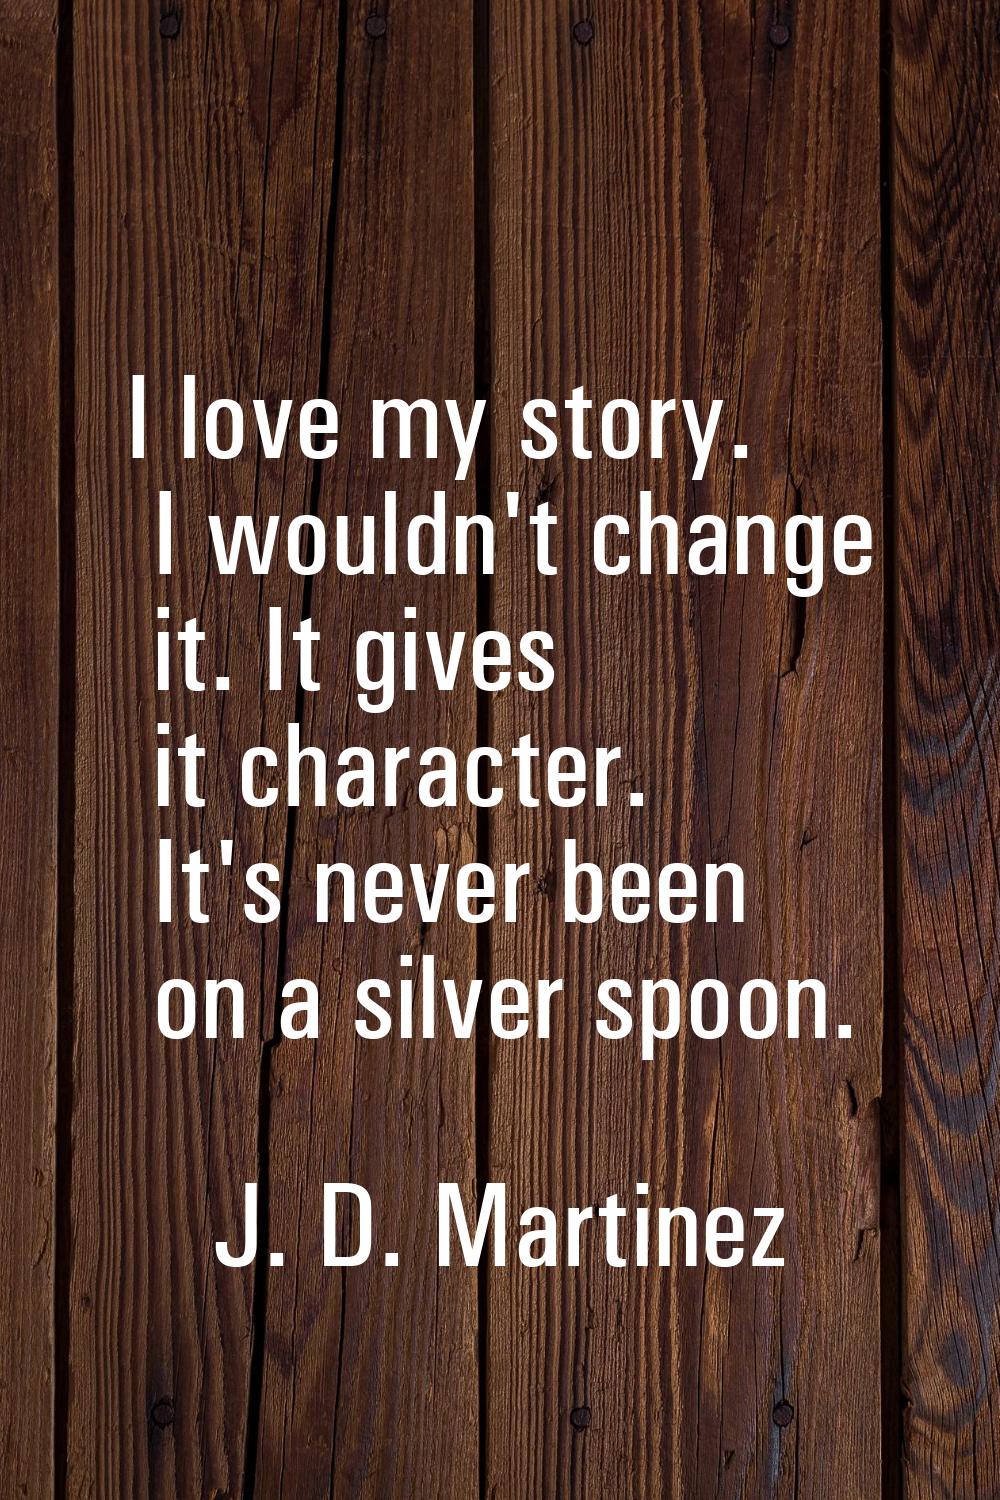 I love my story. I wouldn't change it. It gives it character. It's never been on a silver spoon.